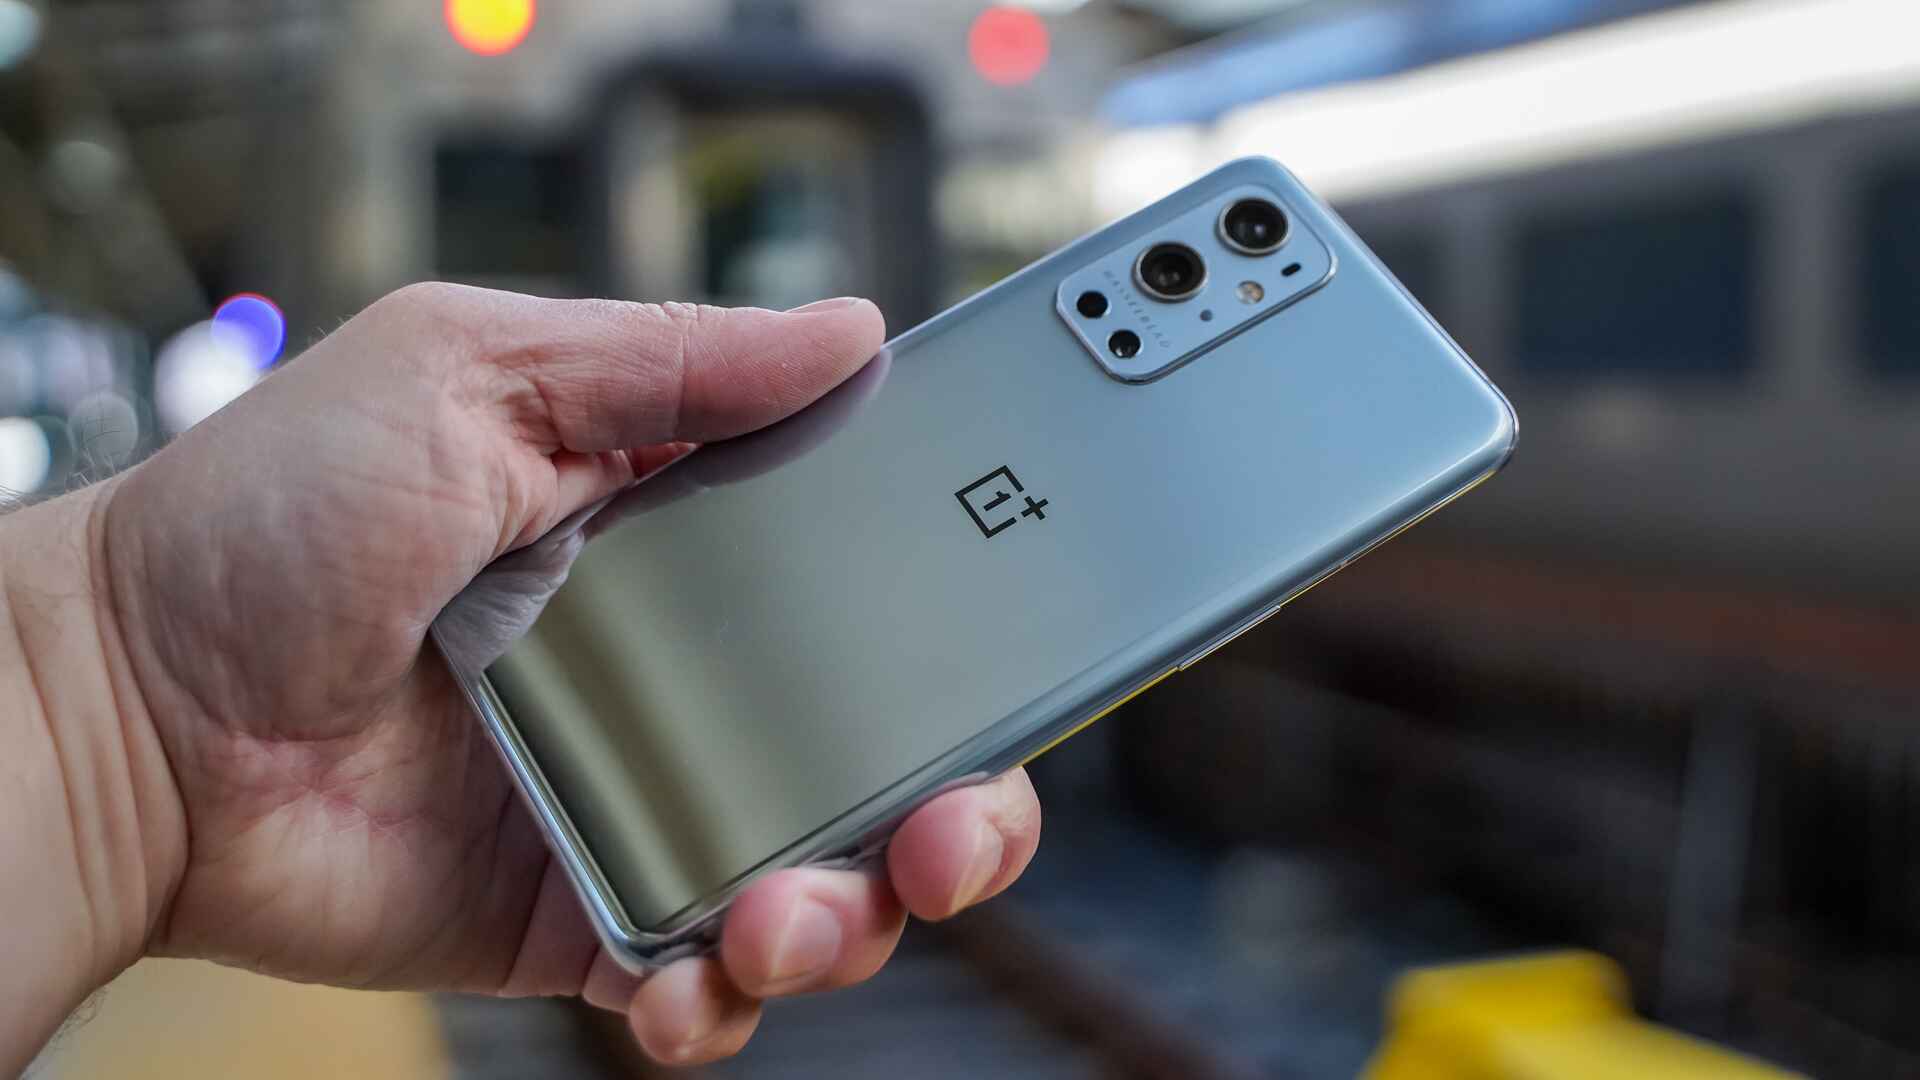 Activating 5G On OnePlus 9 Pro: A Quick Tutorial